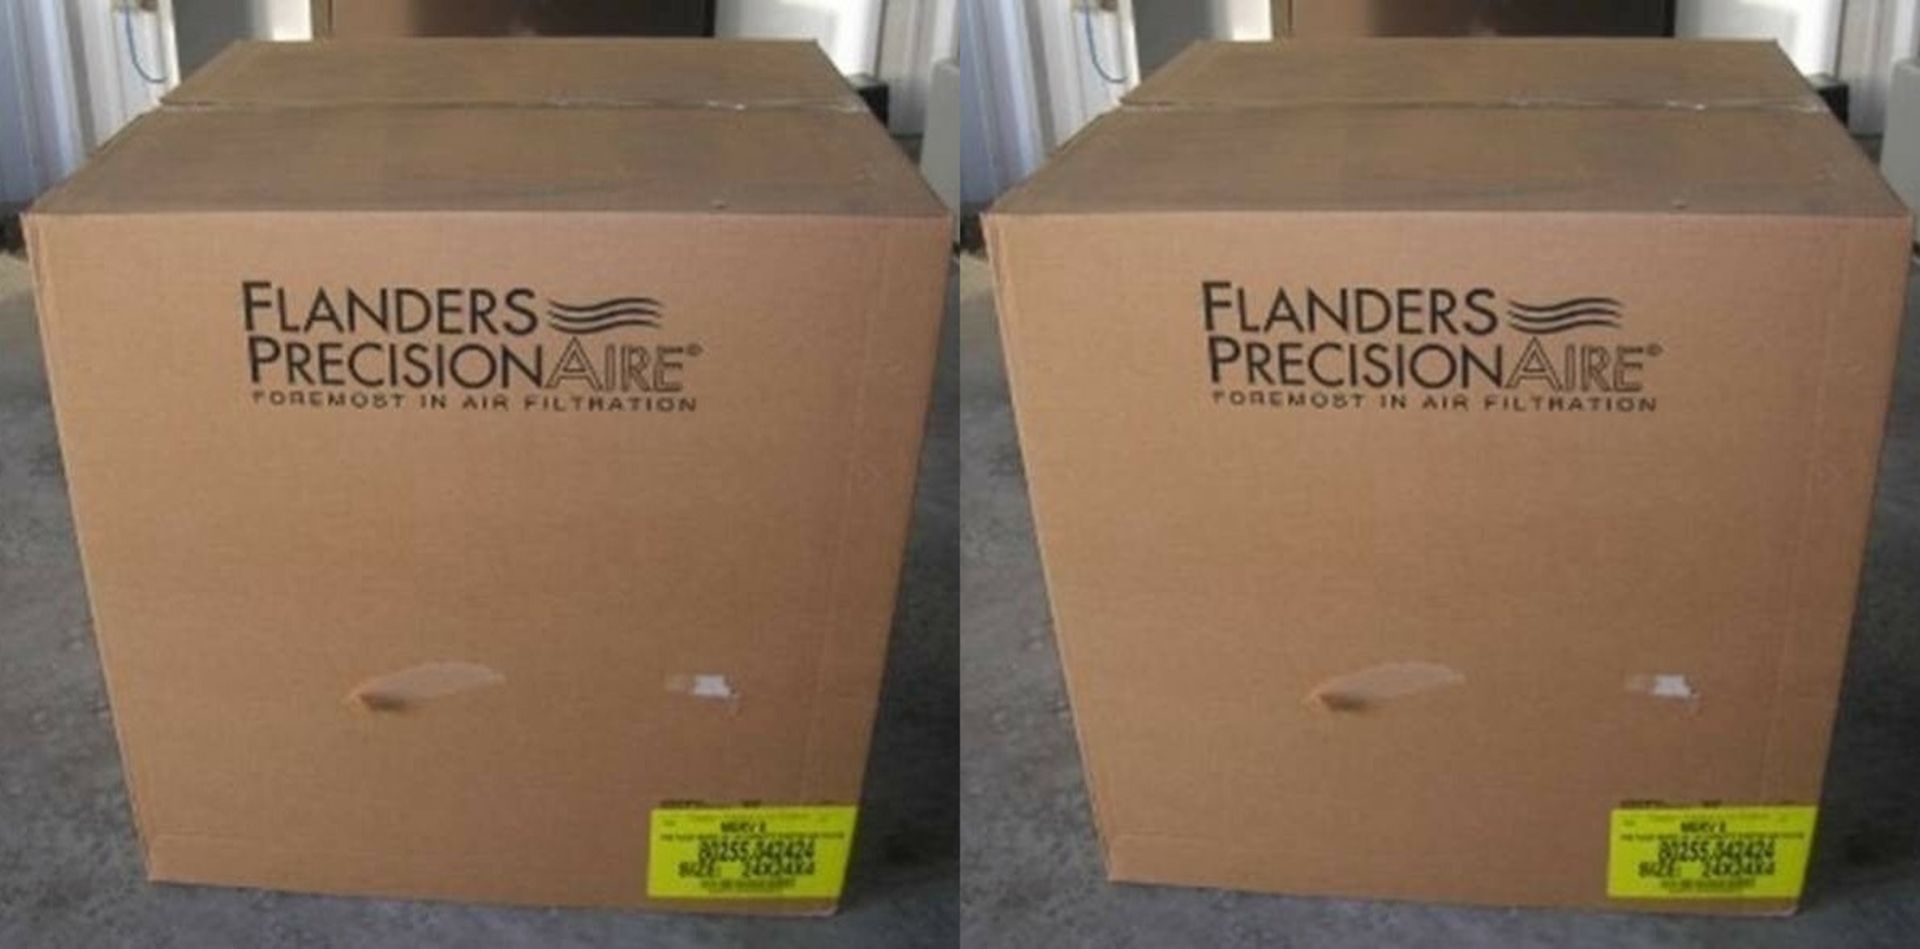 Flanders Precision Aire 24x24x4 Furnace / AC High Capacity Air Filter 6 Pack NEW